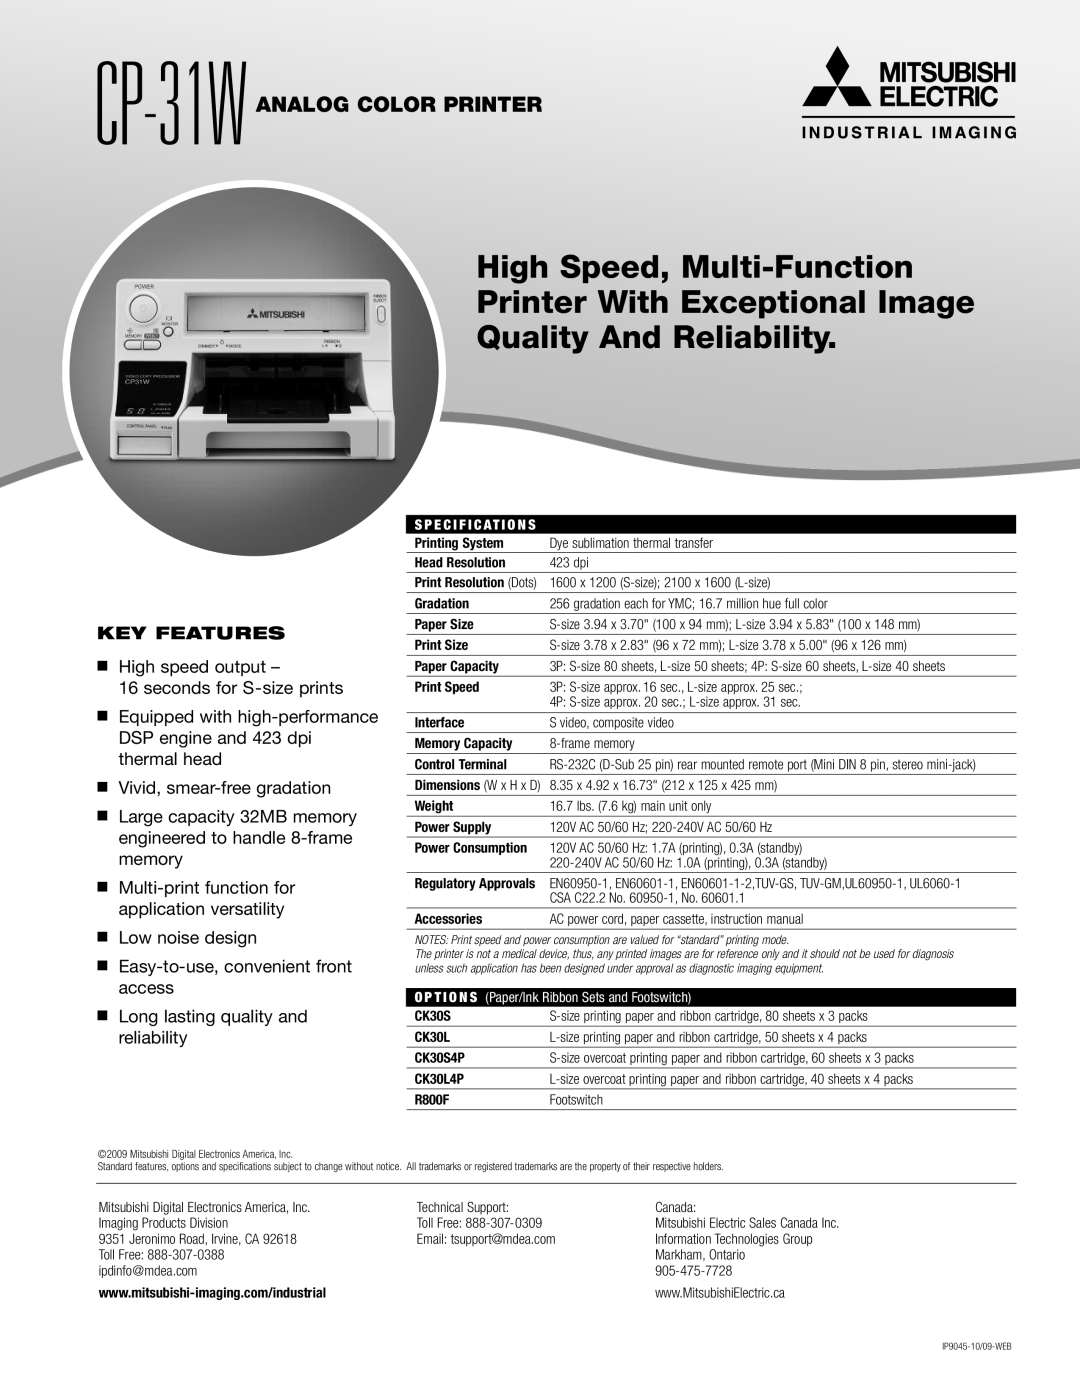 Mitsubishi Electronics CP-31W specifications High Speed, Multi-Function Printer With Exceptional Image, Key Features 